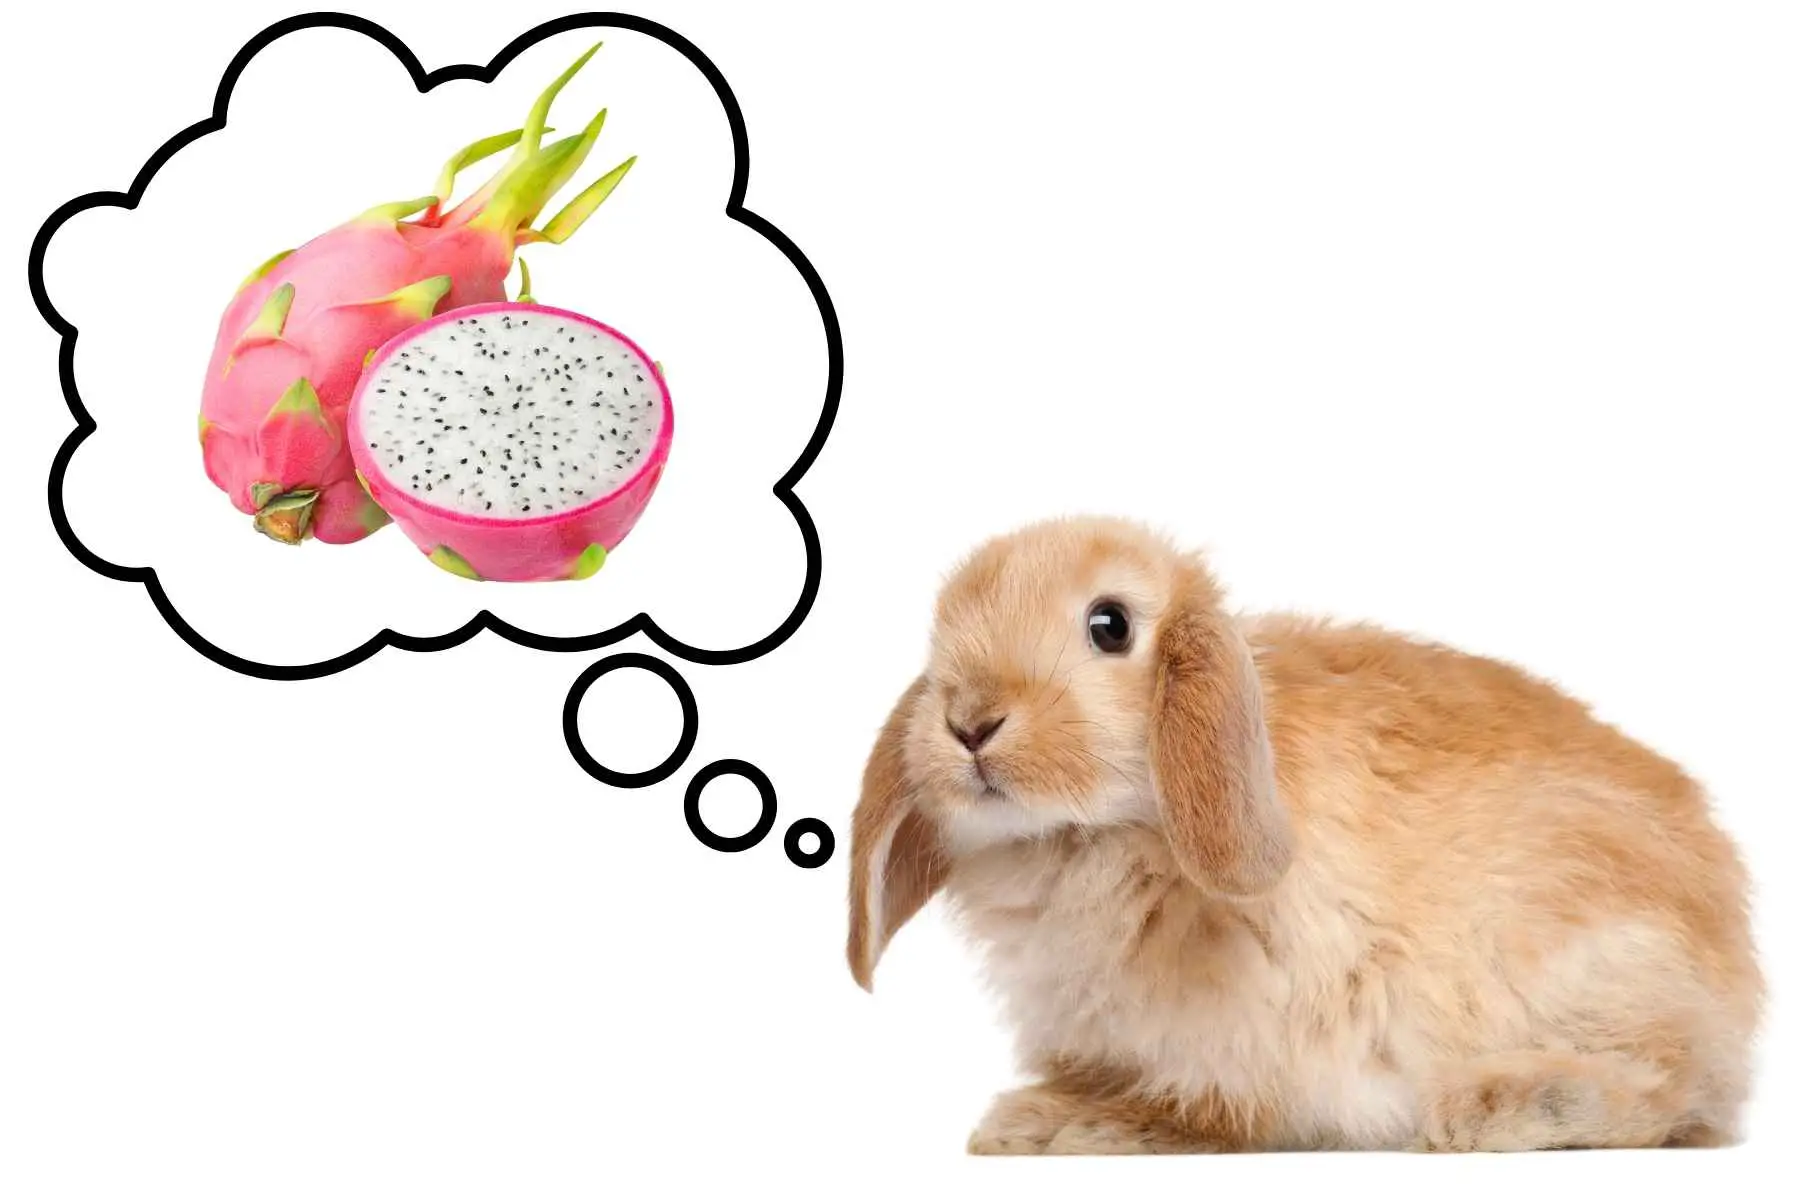 Rabbit daydreaming about dragon fruit